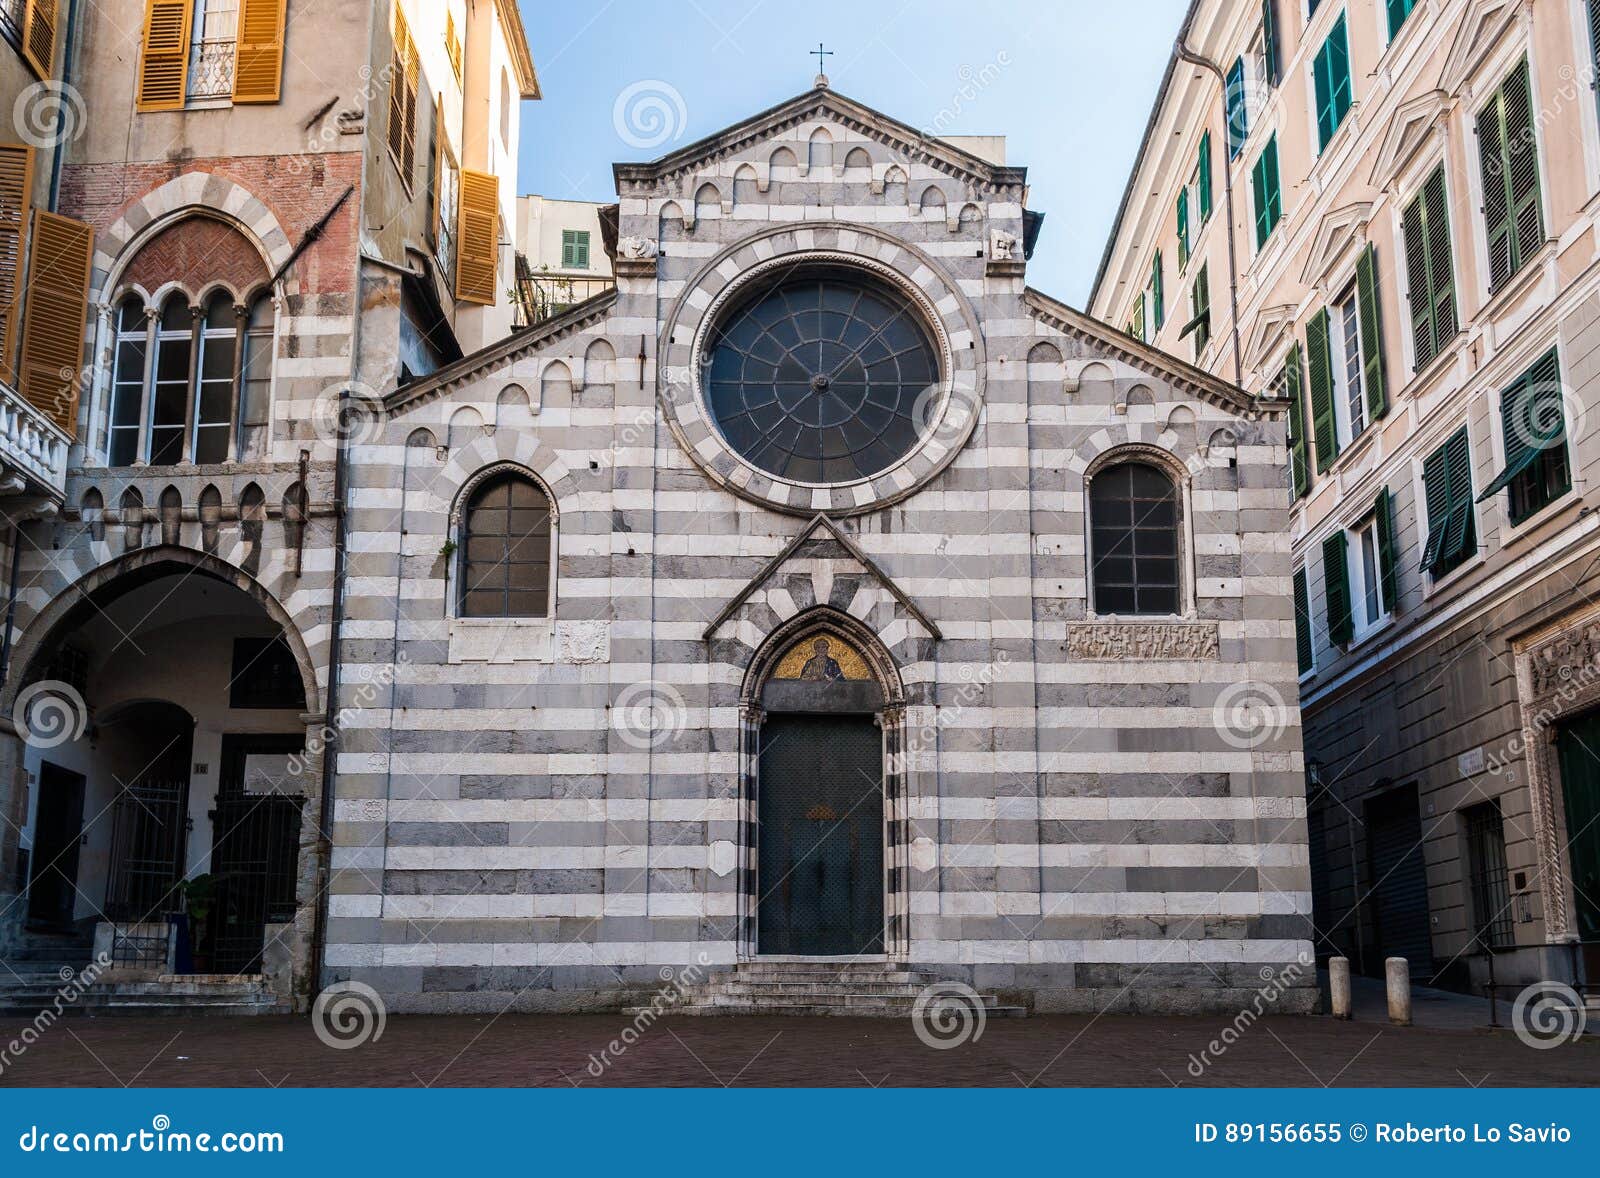 the facade of the small church of `san matteo` xii century, in the downtown of genoa